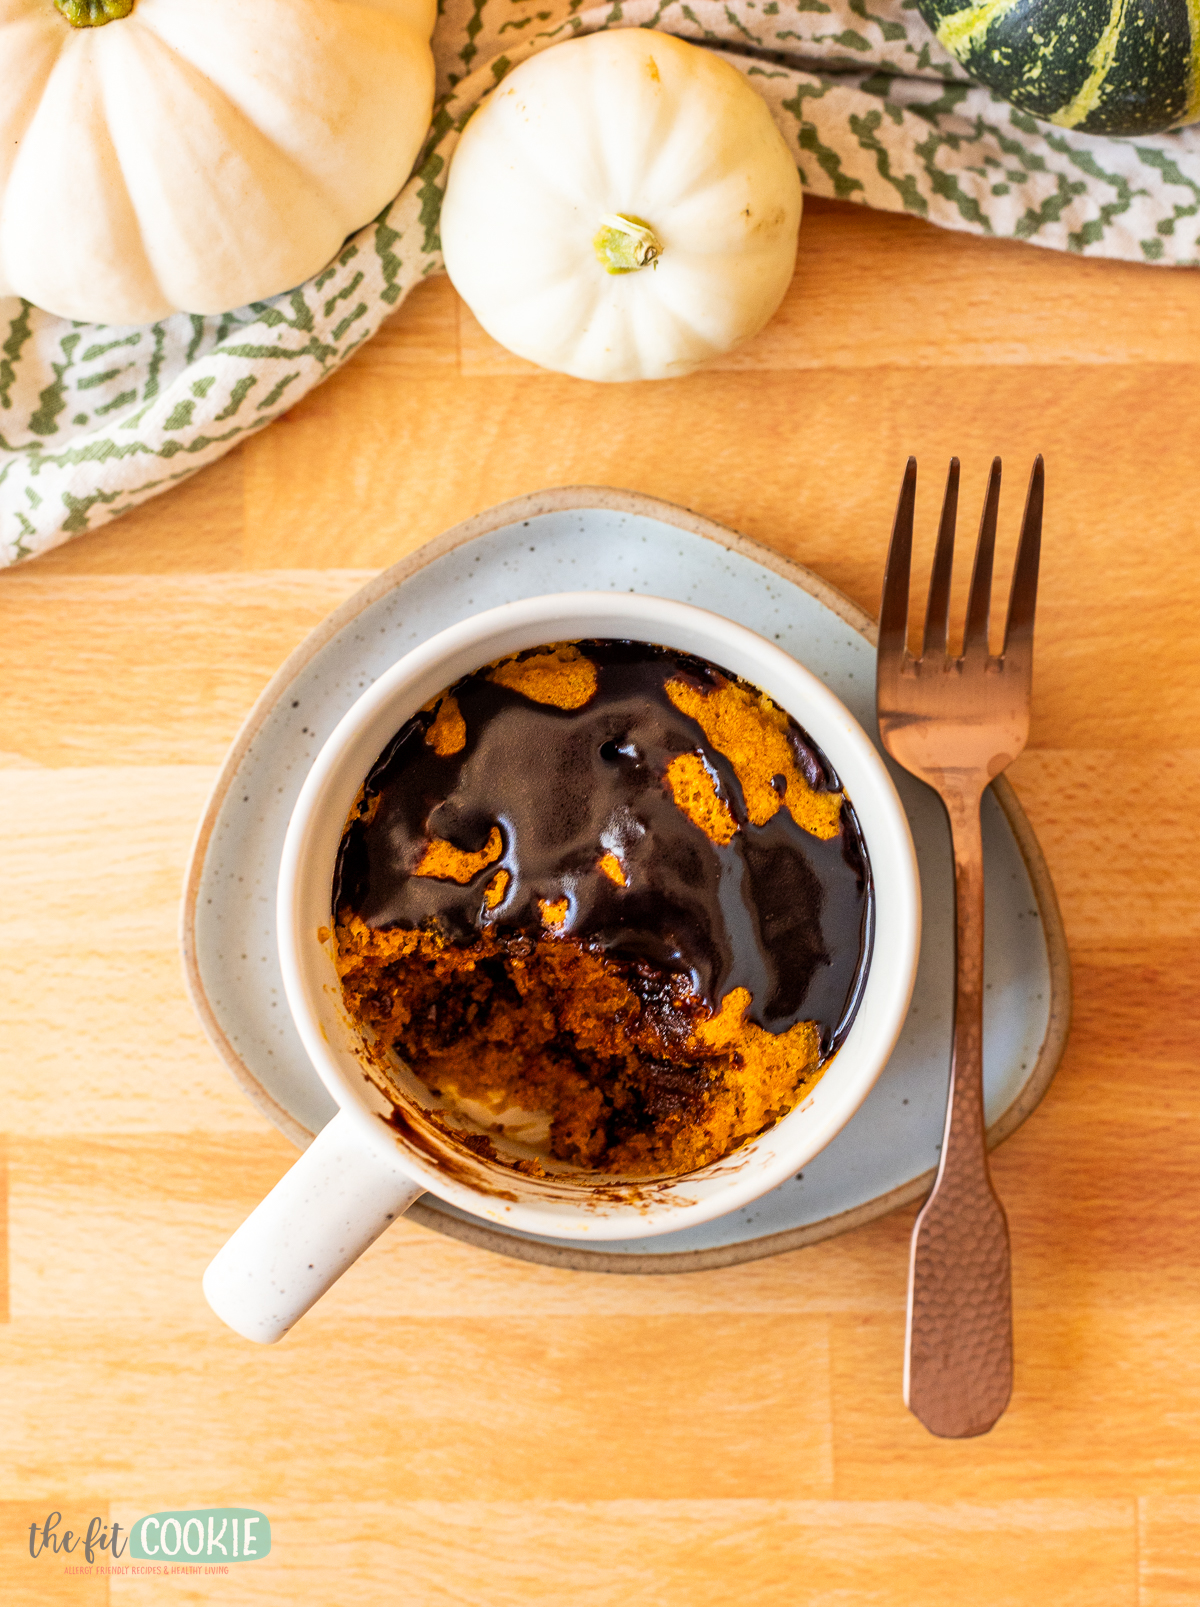 A pumpkin mug cake with a fork next to it on a wood butcher block.